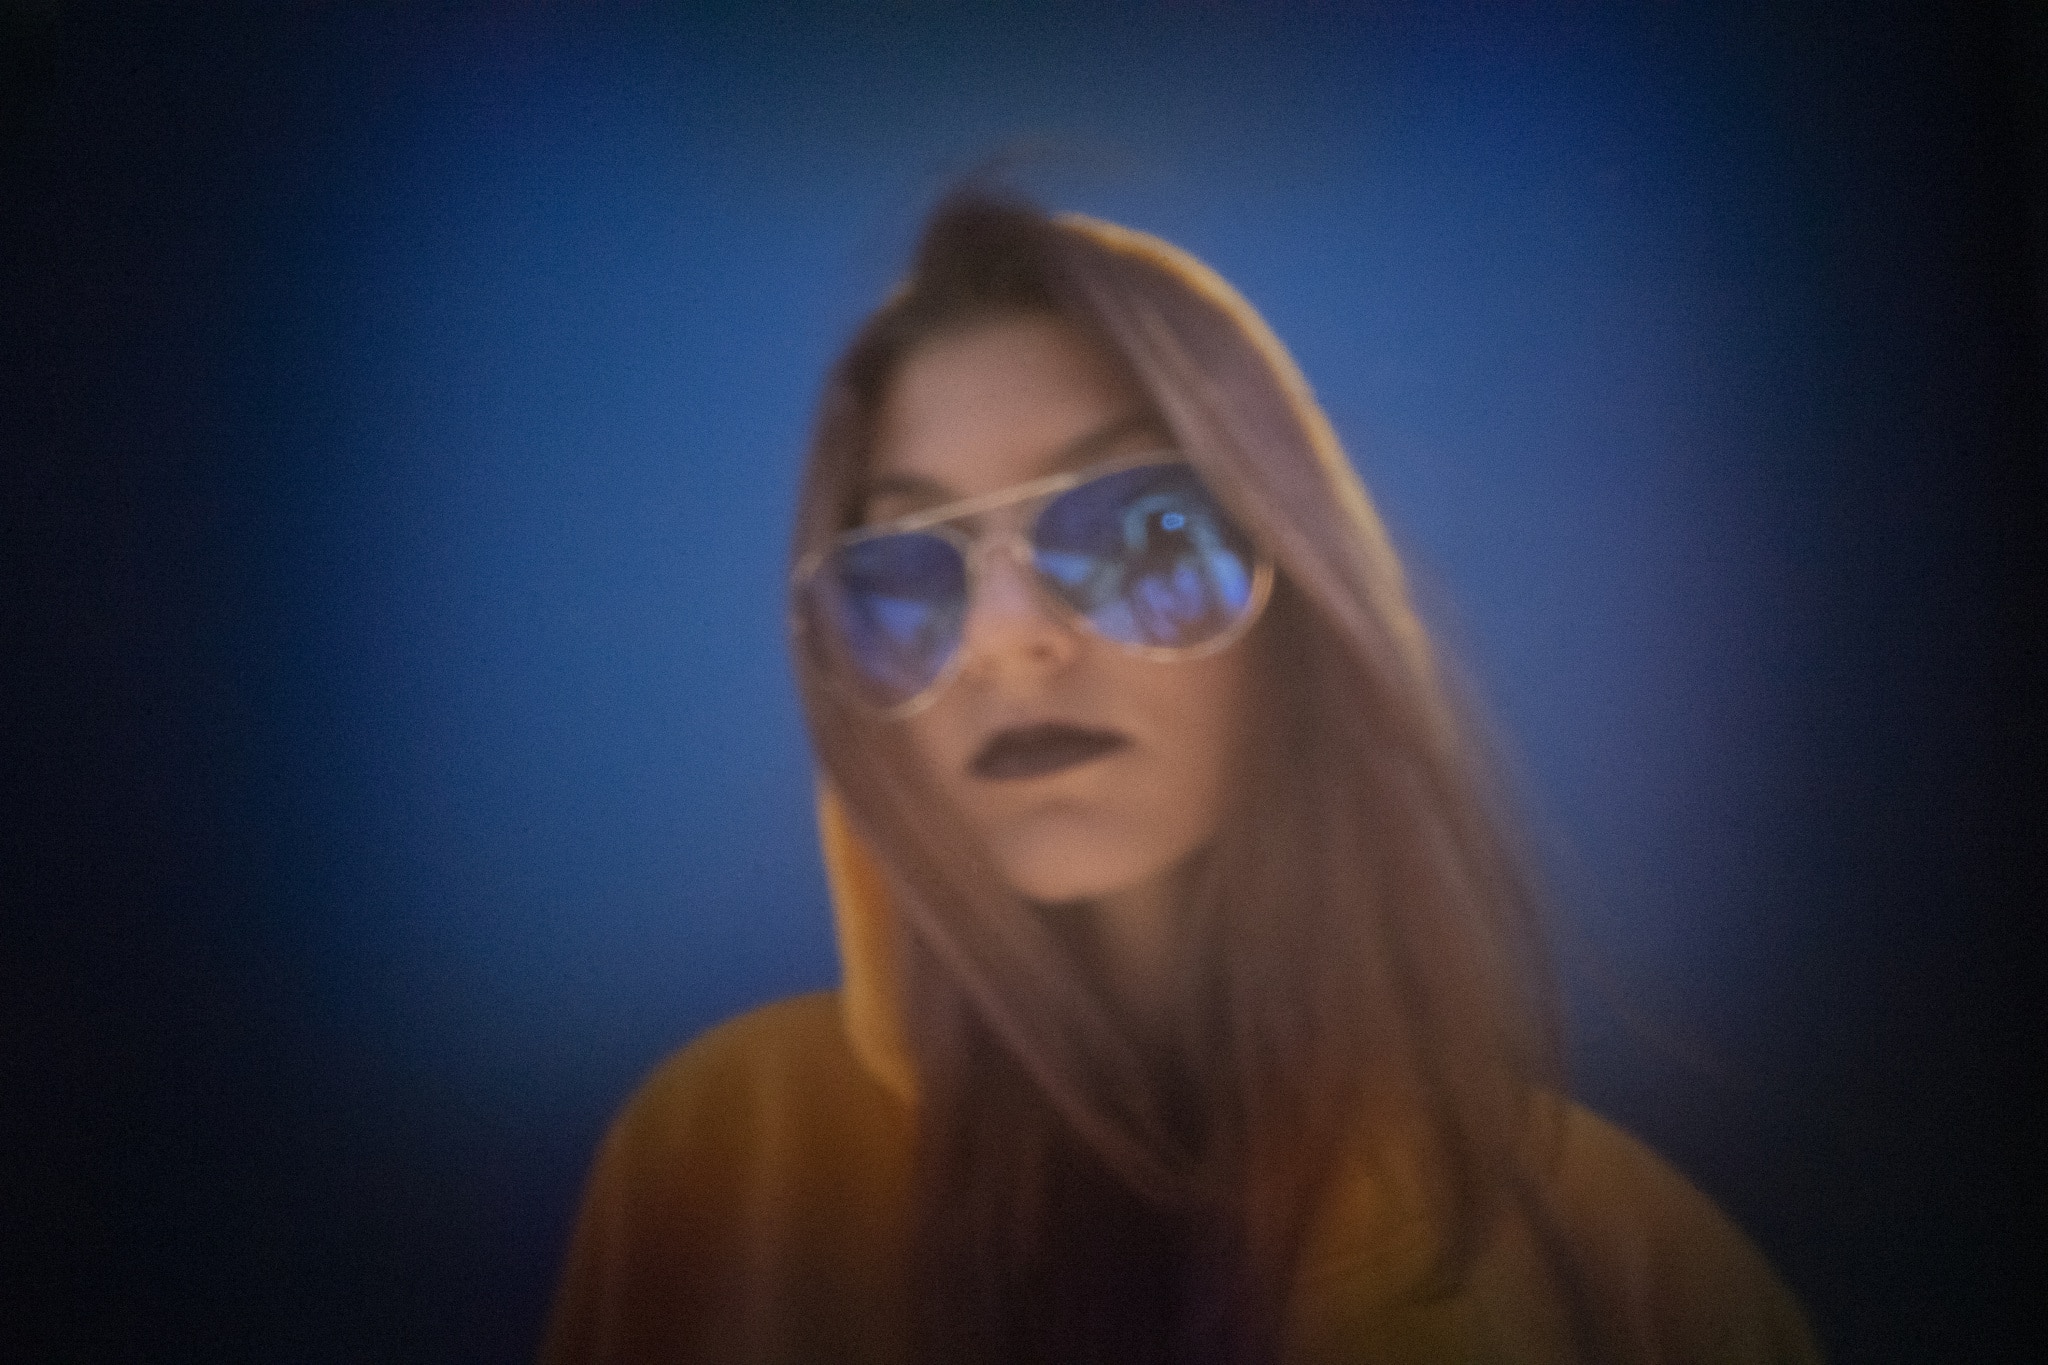 How to Create Your Own “Camera Obscura” Pinhole Camera and Take Crazy Color Portraits